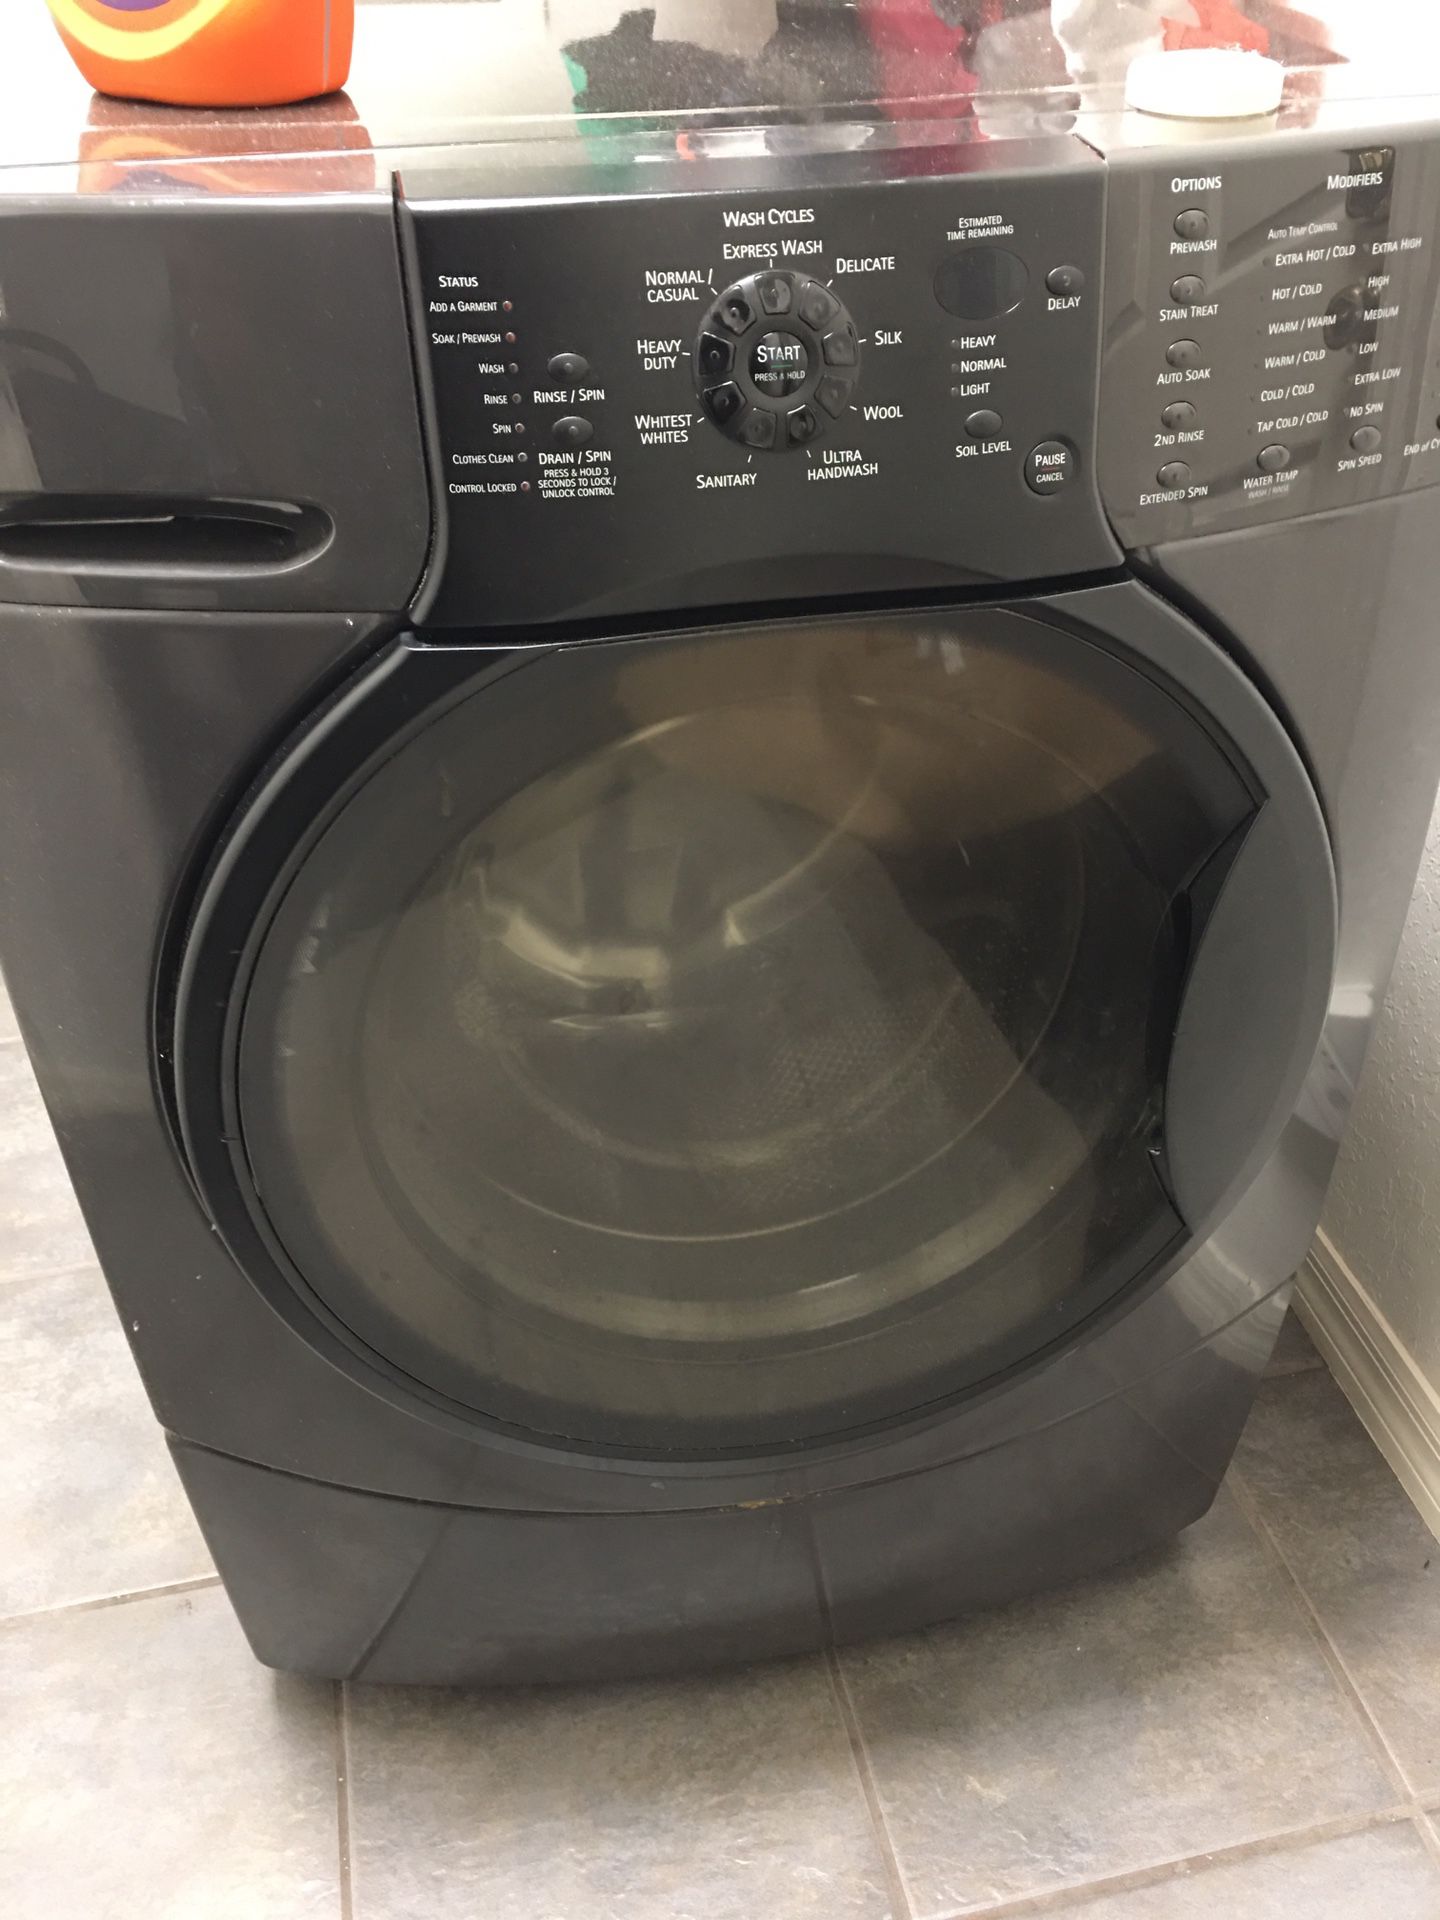 Sears Kenmore HE3t washer